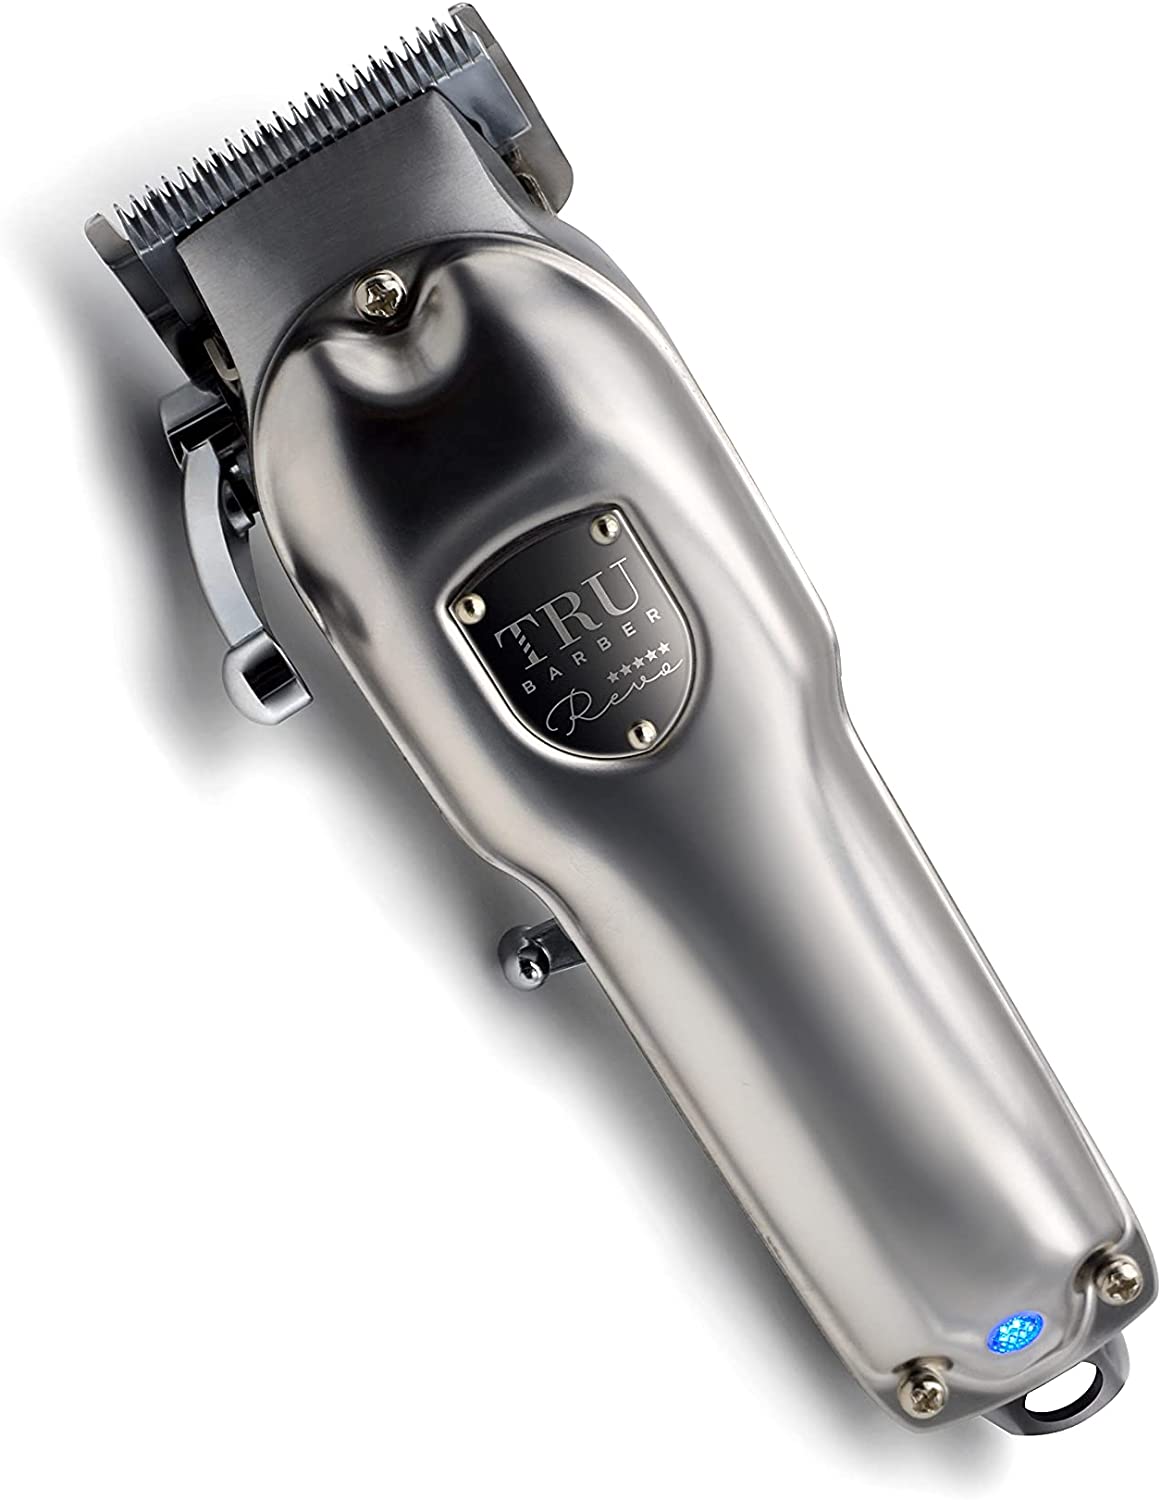 TRU BARBER Revo Professional Hair Trimmer for Barbers and Hairdressers Motor 6500 rpm with Barber Combs Hair Trimmer